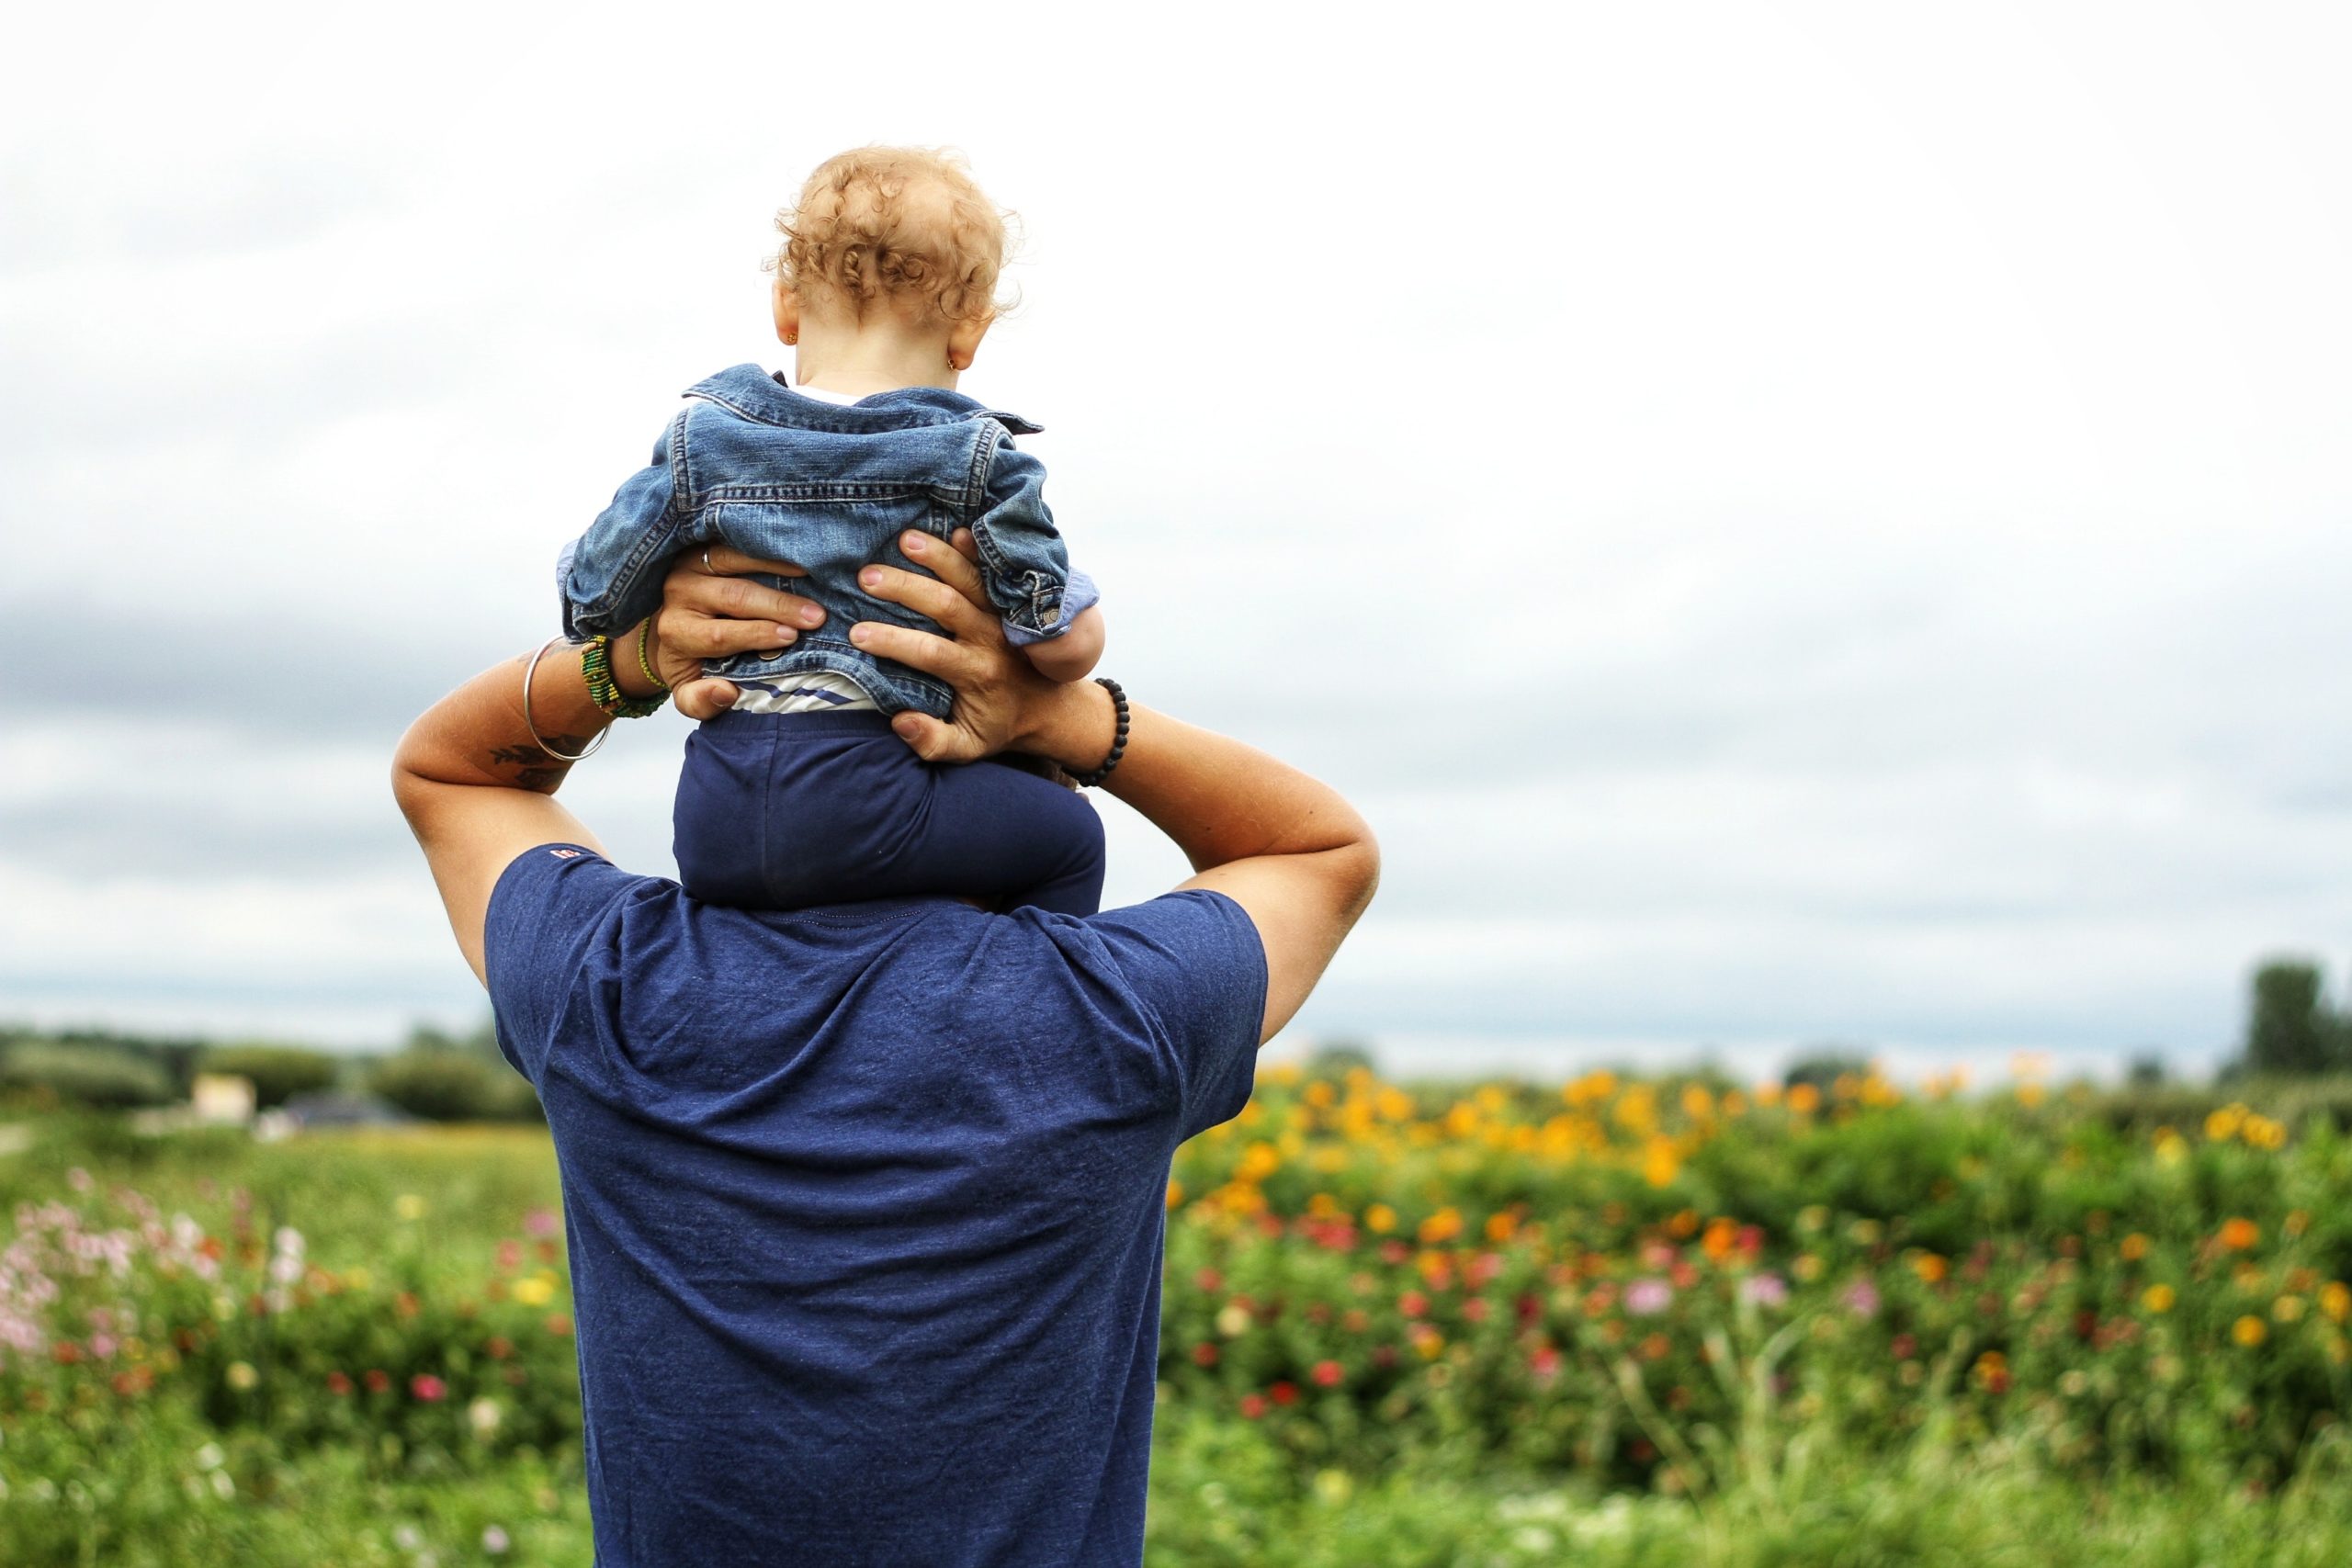 More and more fathers are getting more involved in homemaking than ever before - here are some ways you can help break the stay-at-home dad stigma.